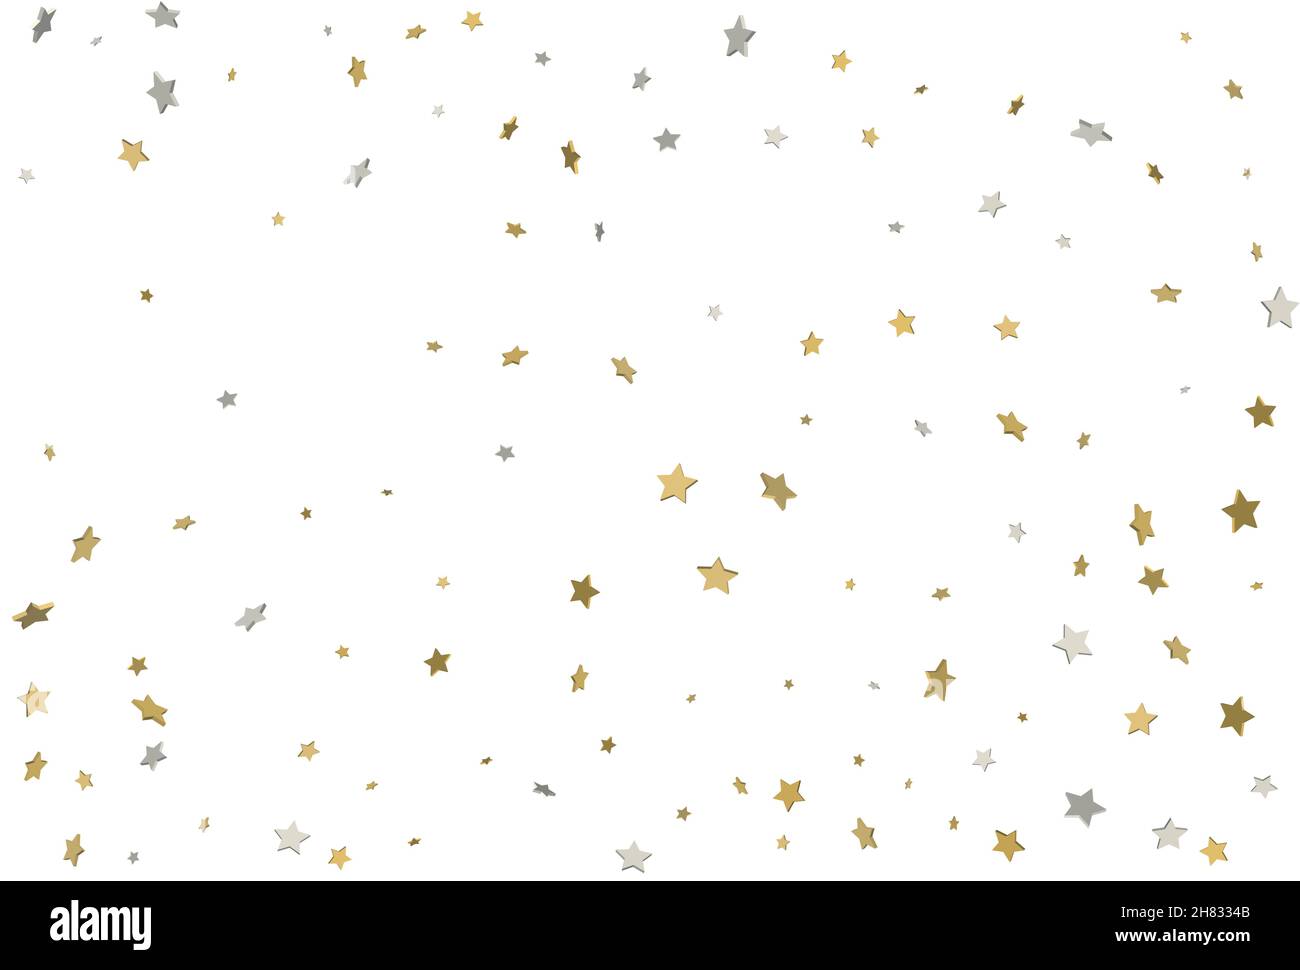 Gold Silver Streamer Confetti Background Stock Vector (Royalty Free)  450394918